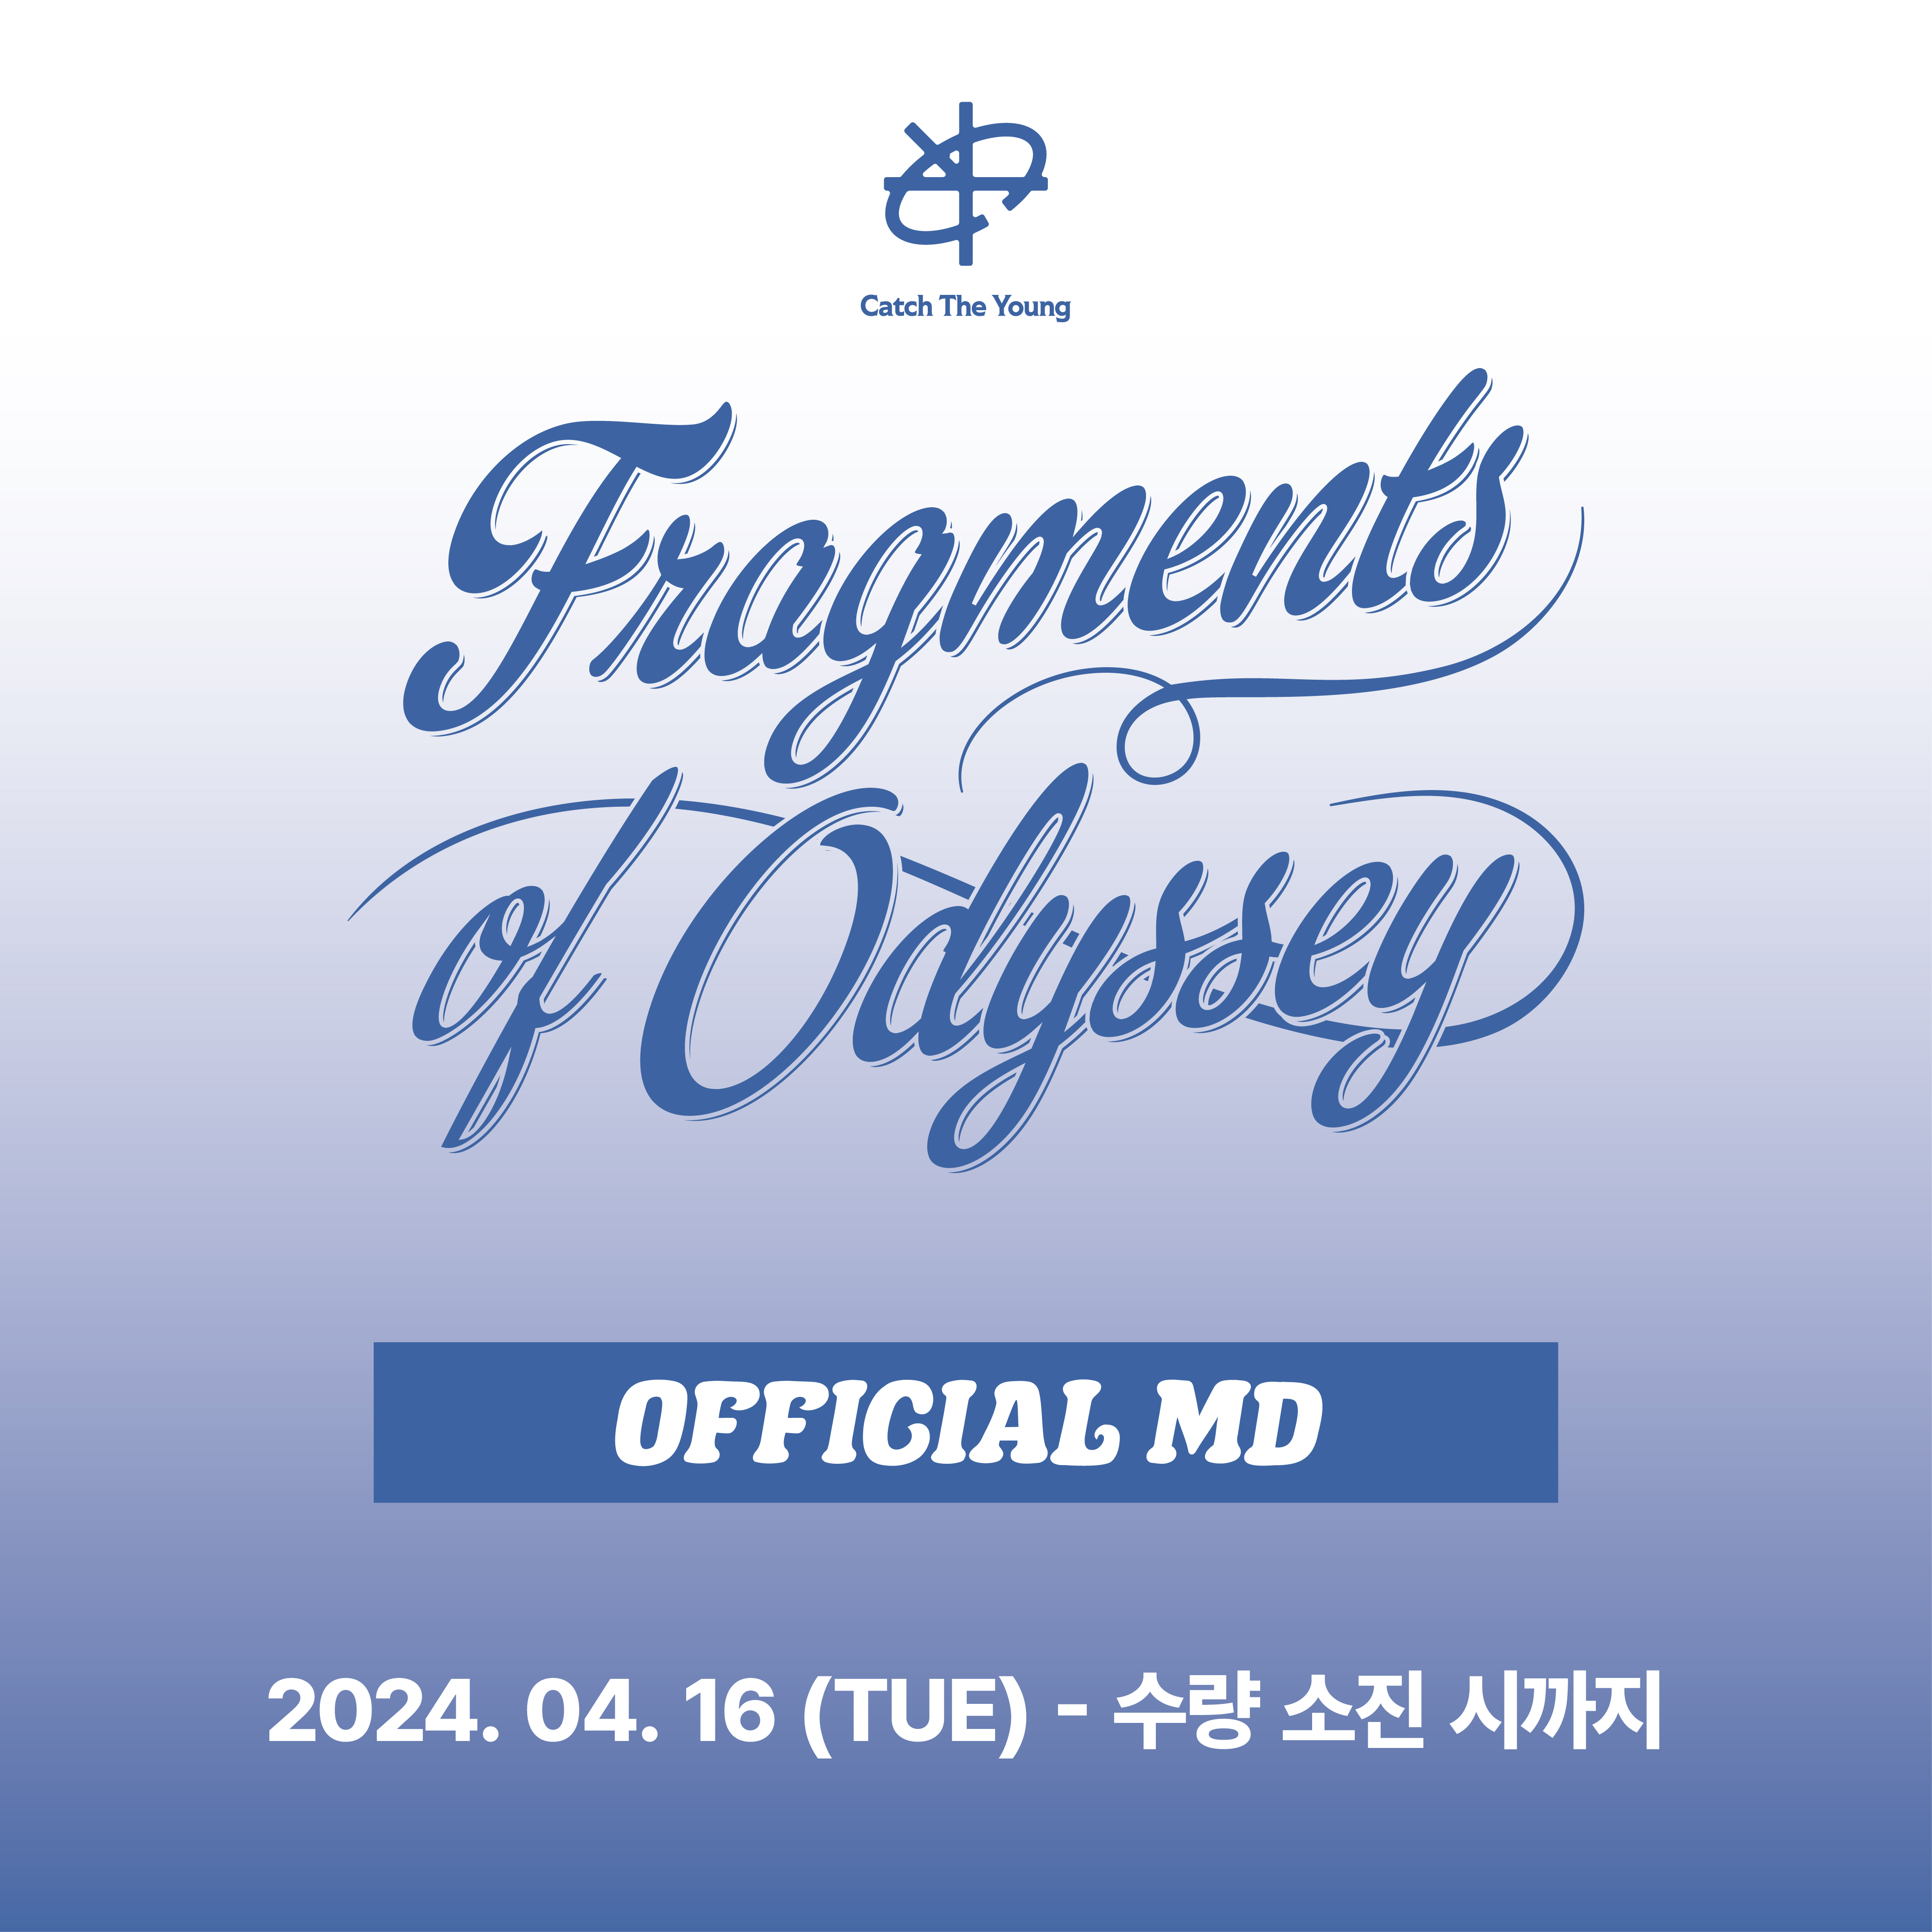 Catch The Young [Fragments of Odyssey] OFFICIAL MD